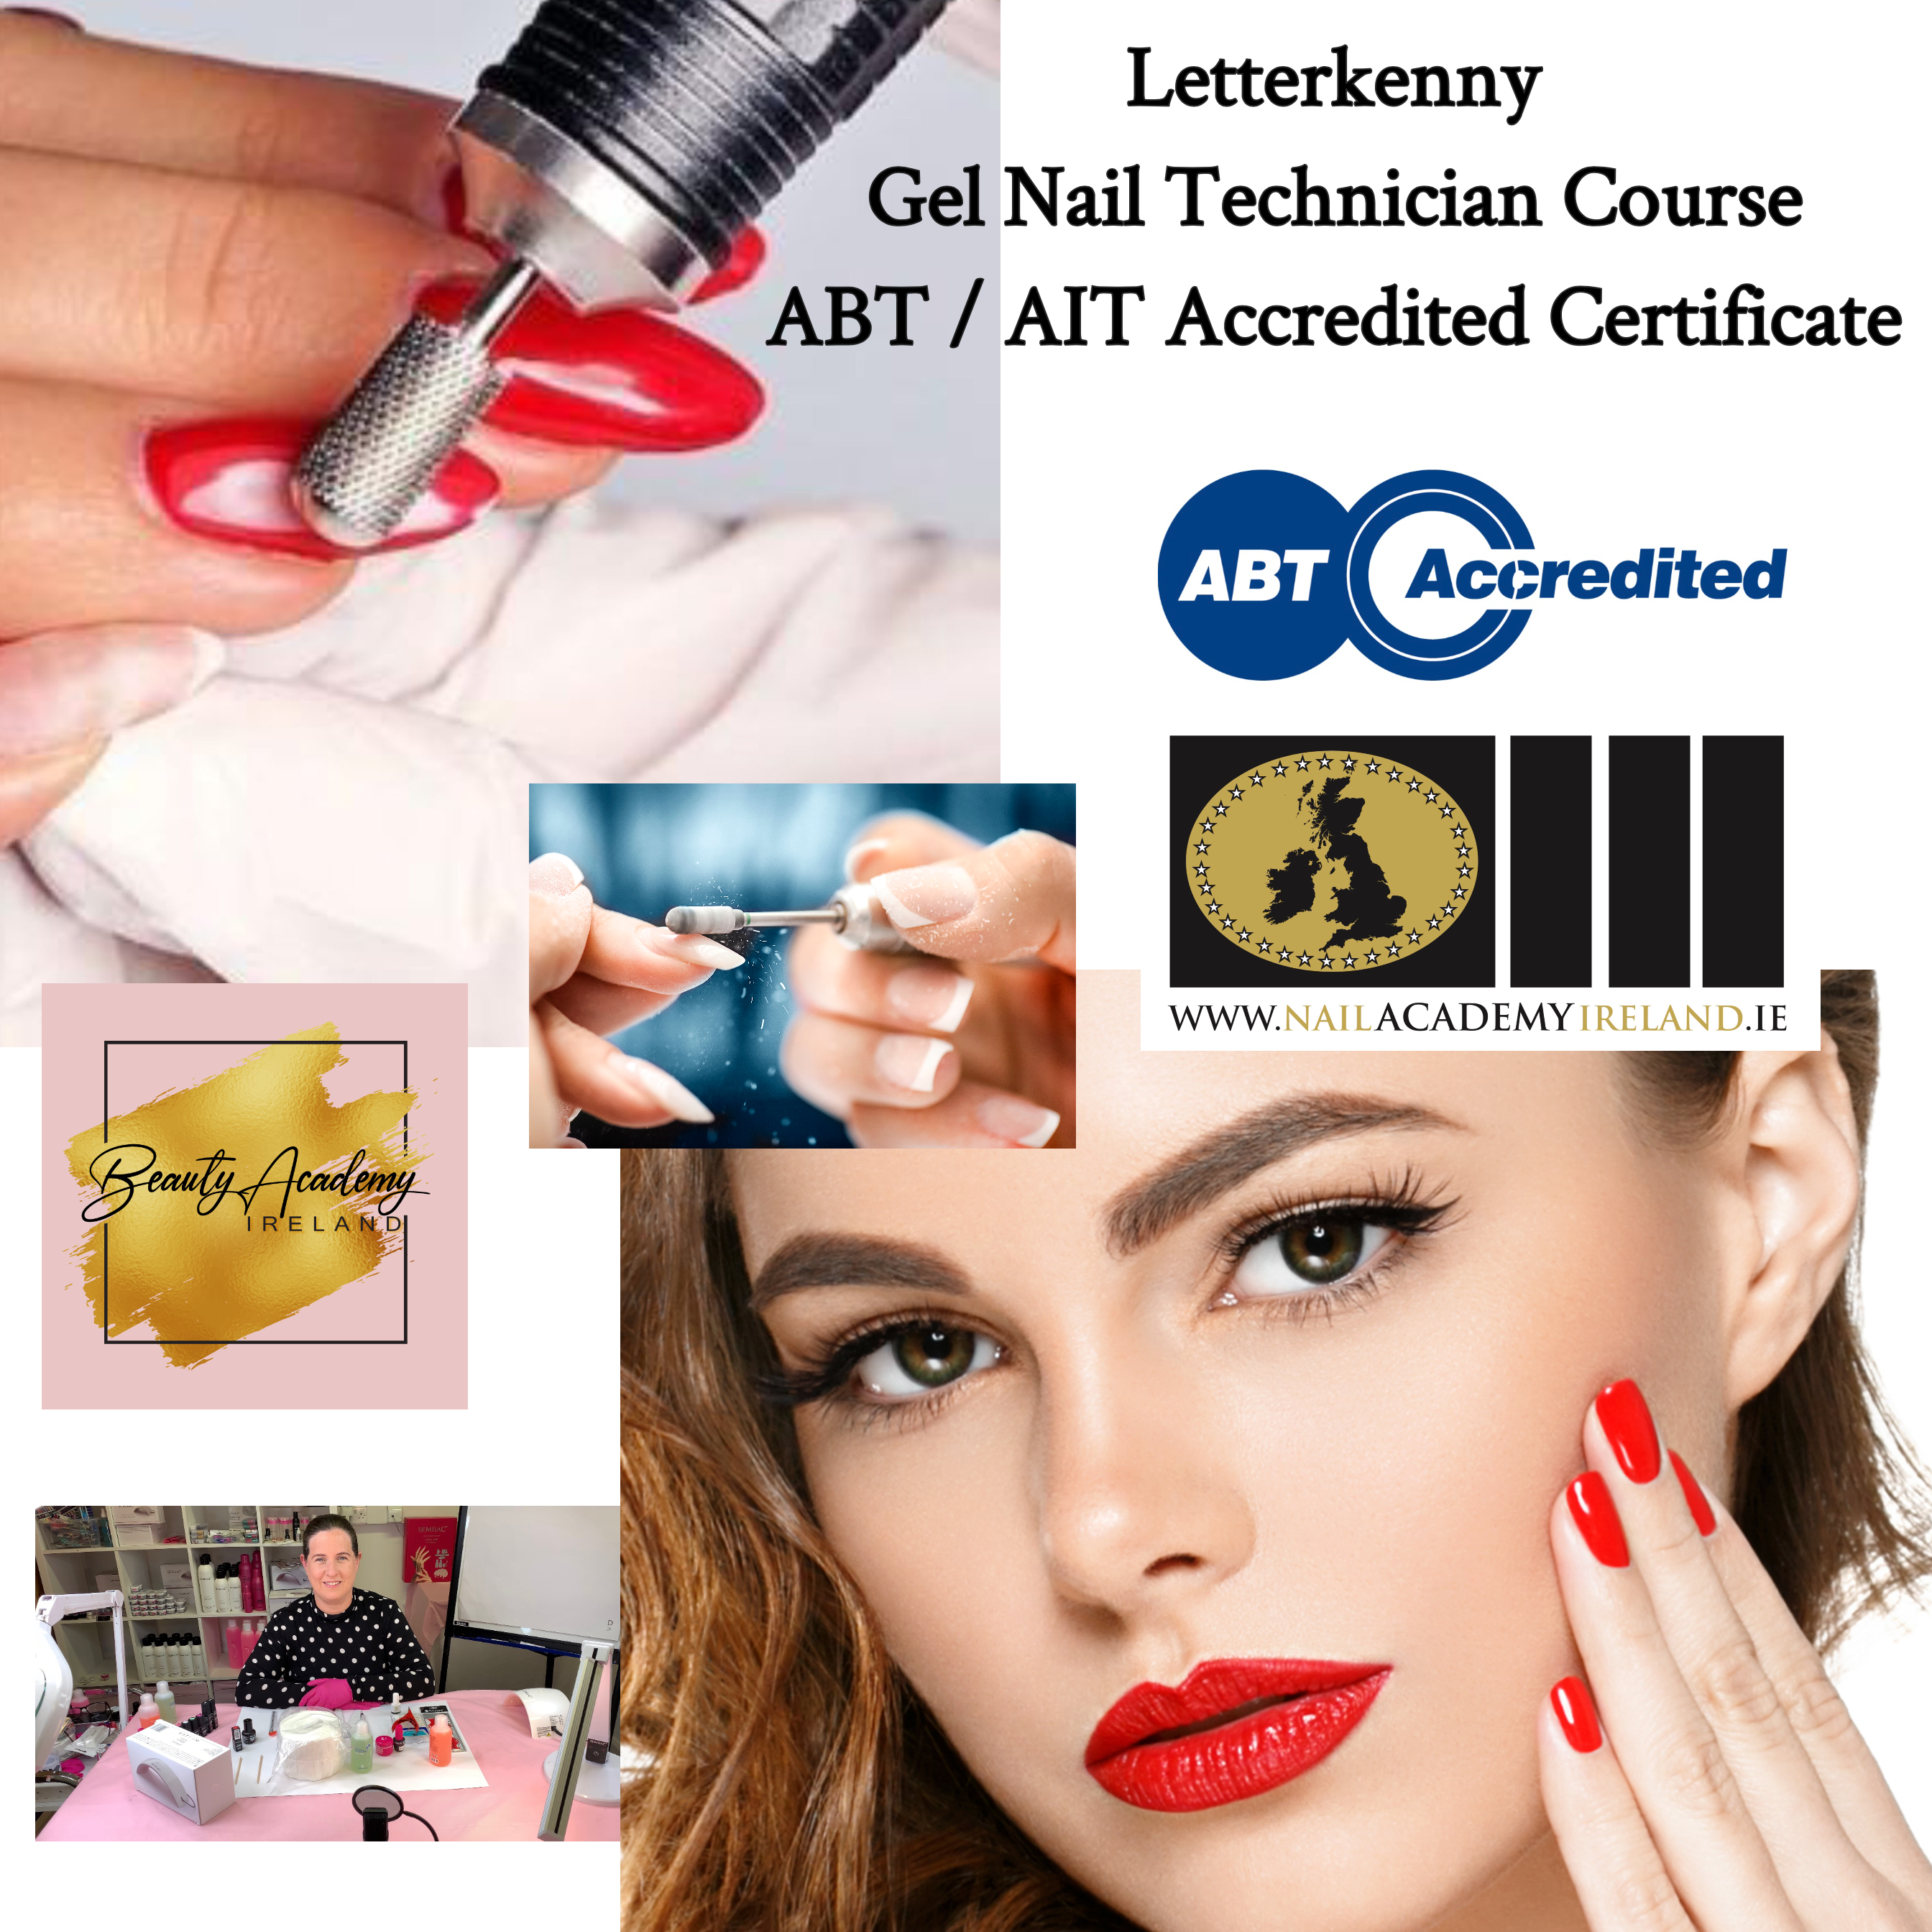 Letterkenny : Gel Nail Technician Course ( 2023 October 15 & October 22 ) Two Full days 10am until 5pm each day. Face to Face In Class Training. Total Cost of Course €399 ABT-AIT Accredited